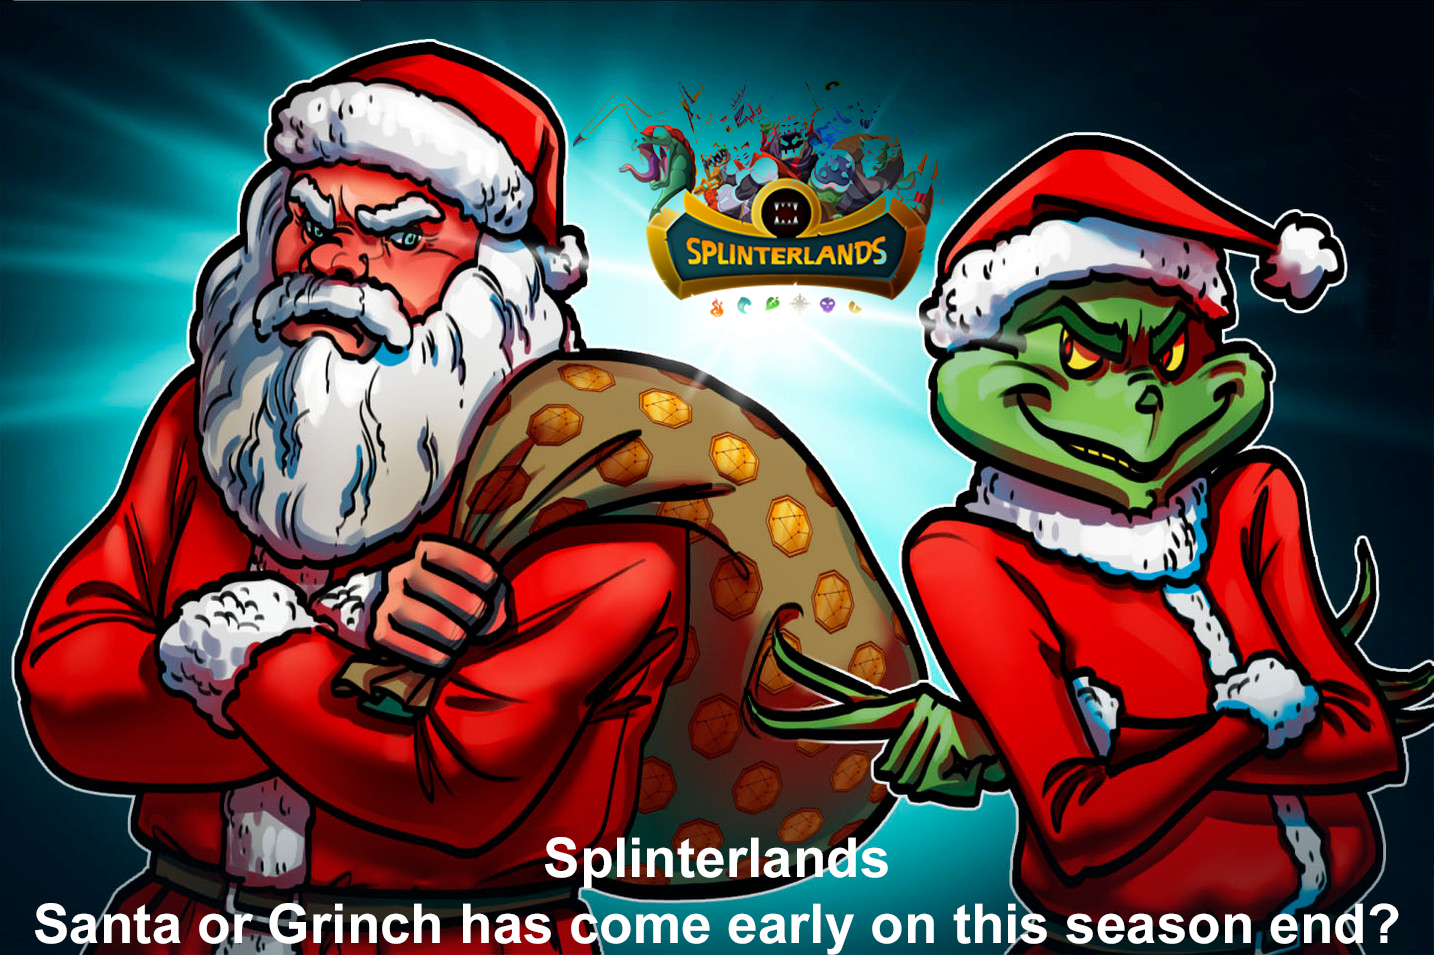 @behiver/splinterlands-did-santa-or-grinch-come-early-with-rewards-on-this-season-end